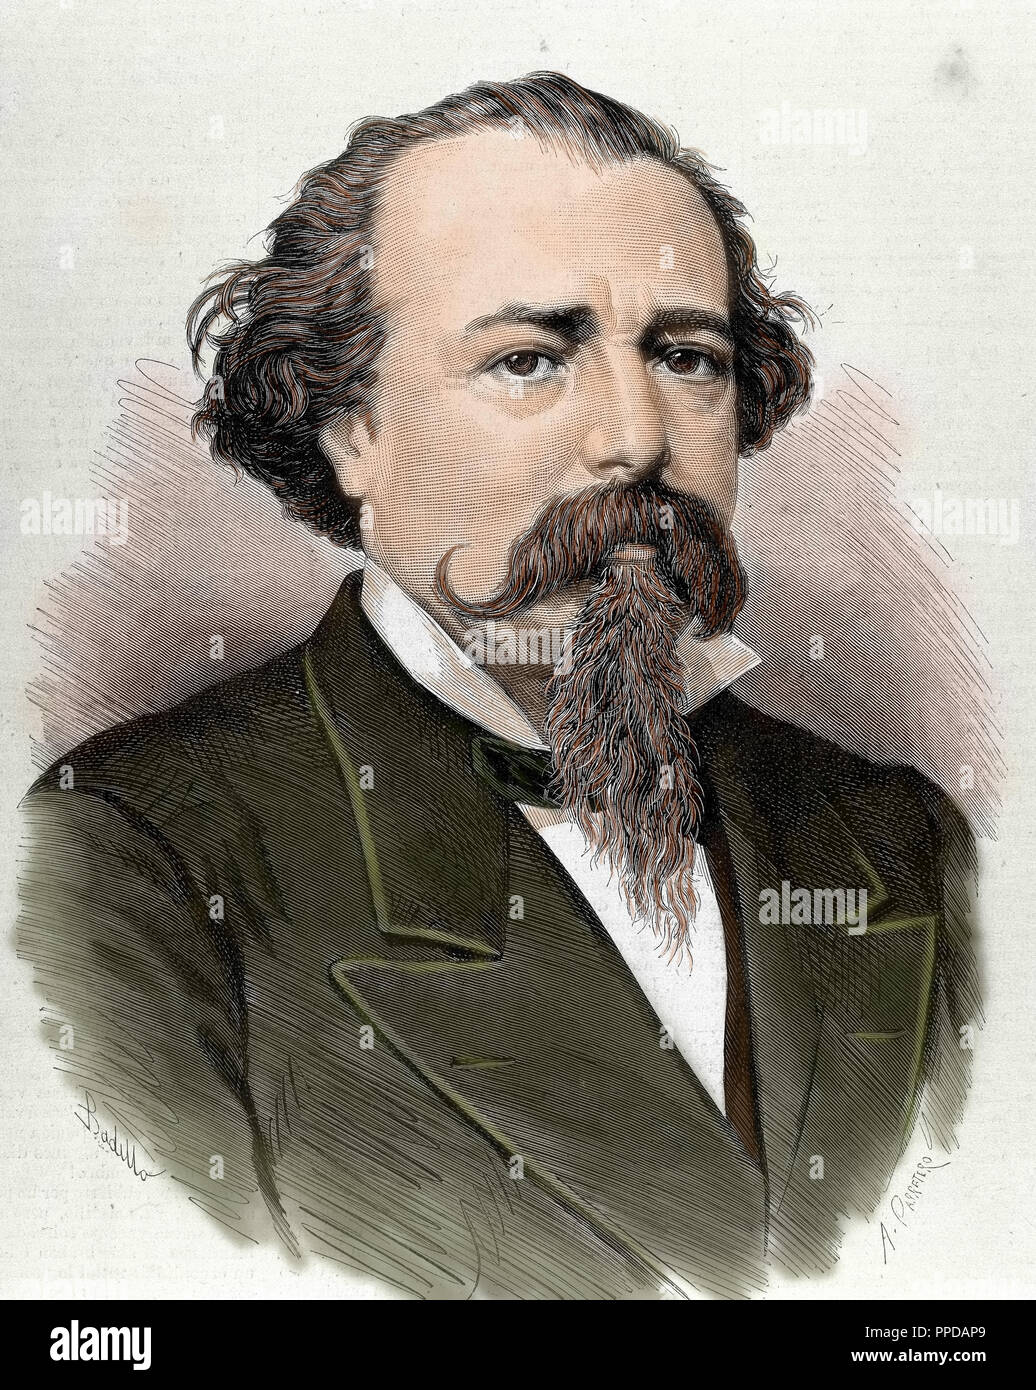 Lopez de Ayala, Adelardo (1828-1879). Poet, playwright and Spanish politician. Colored engraving from 1879. Stock Photo